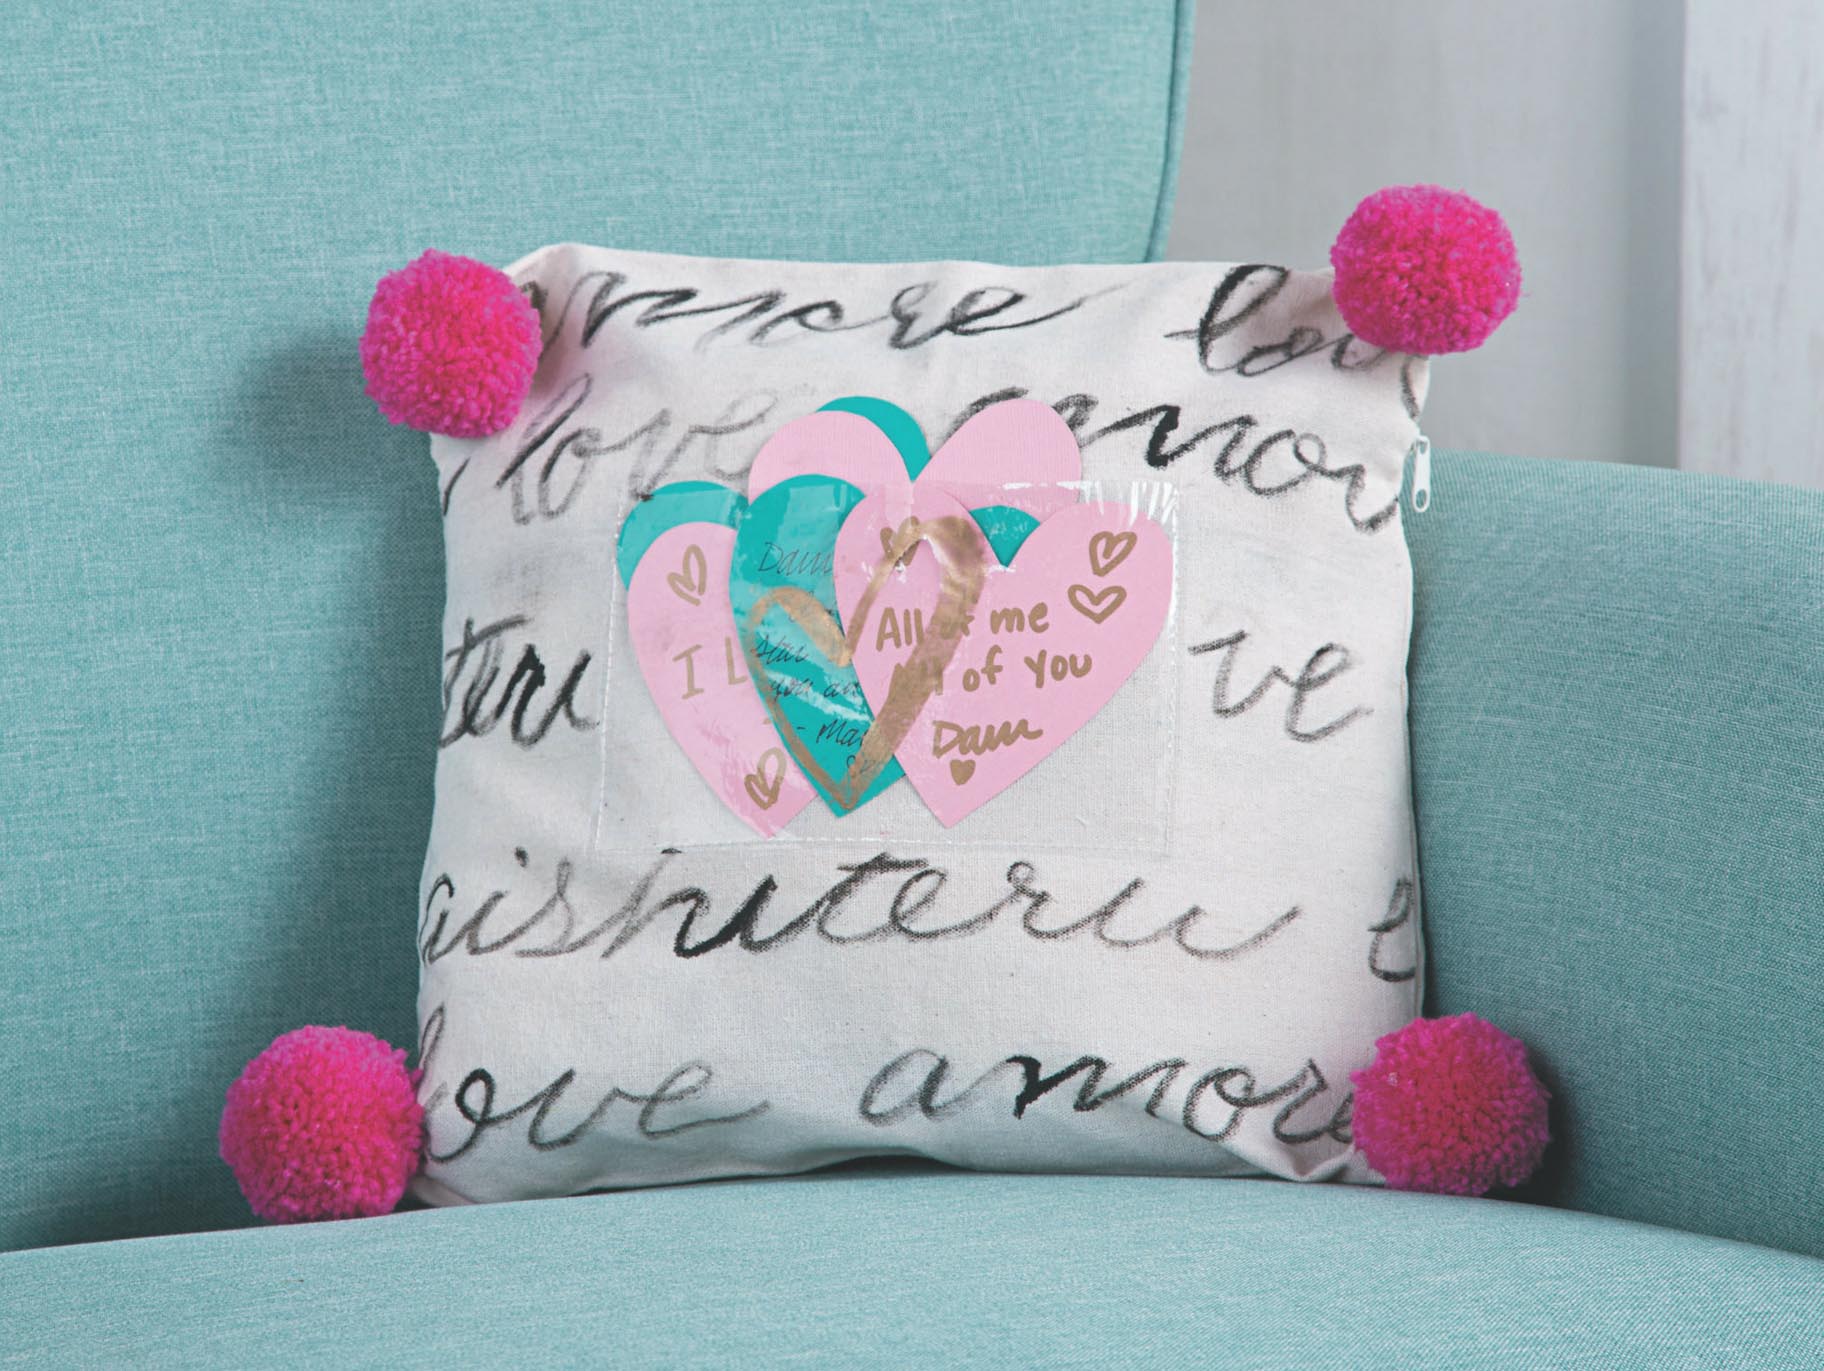  Valentine's Day Throw Pillow Cover The Ladies Love Me